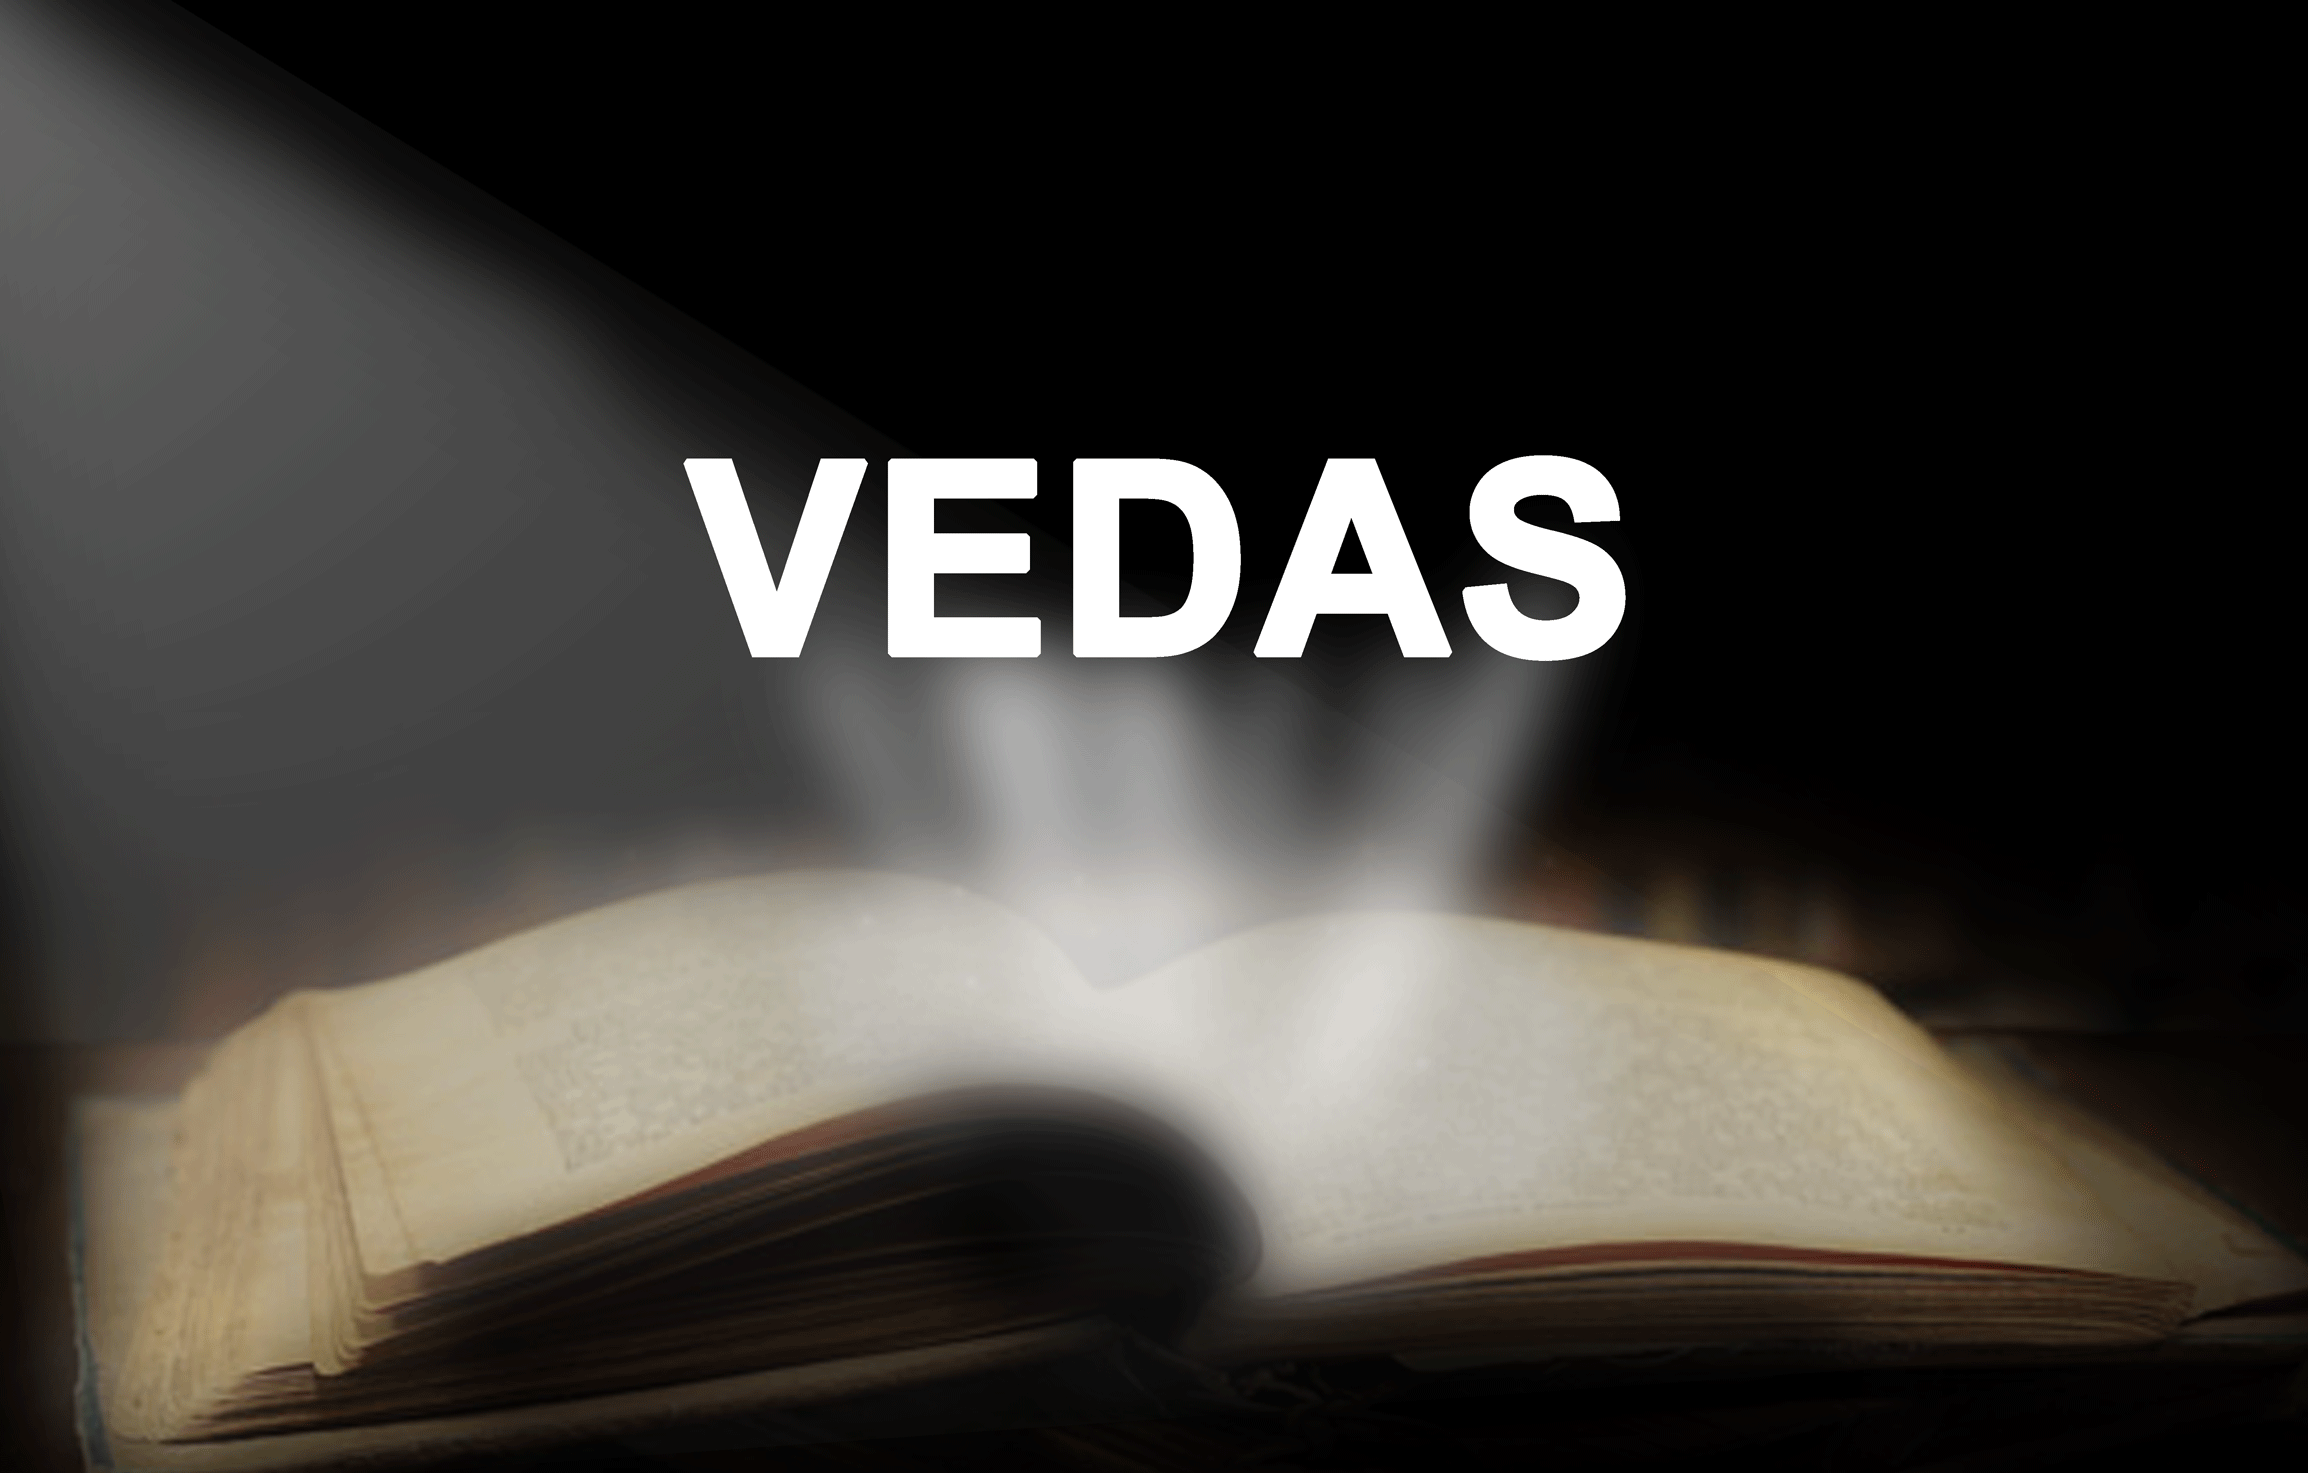 VEDAS’ Supremacy for Mankind – A Prayer for World Peace